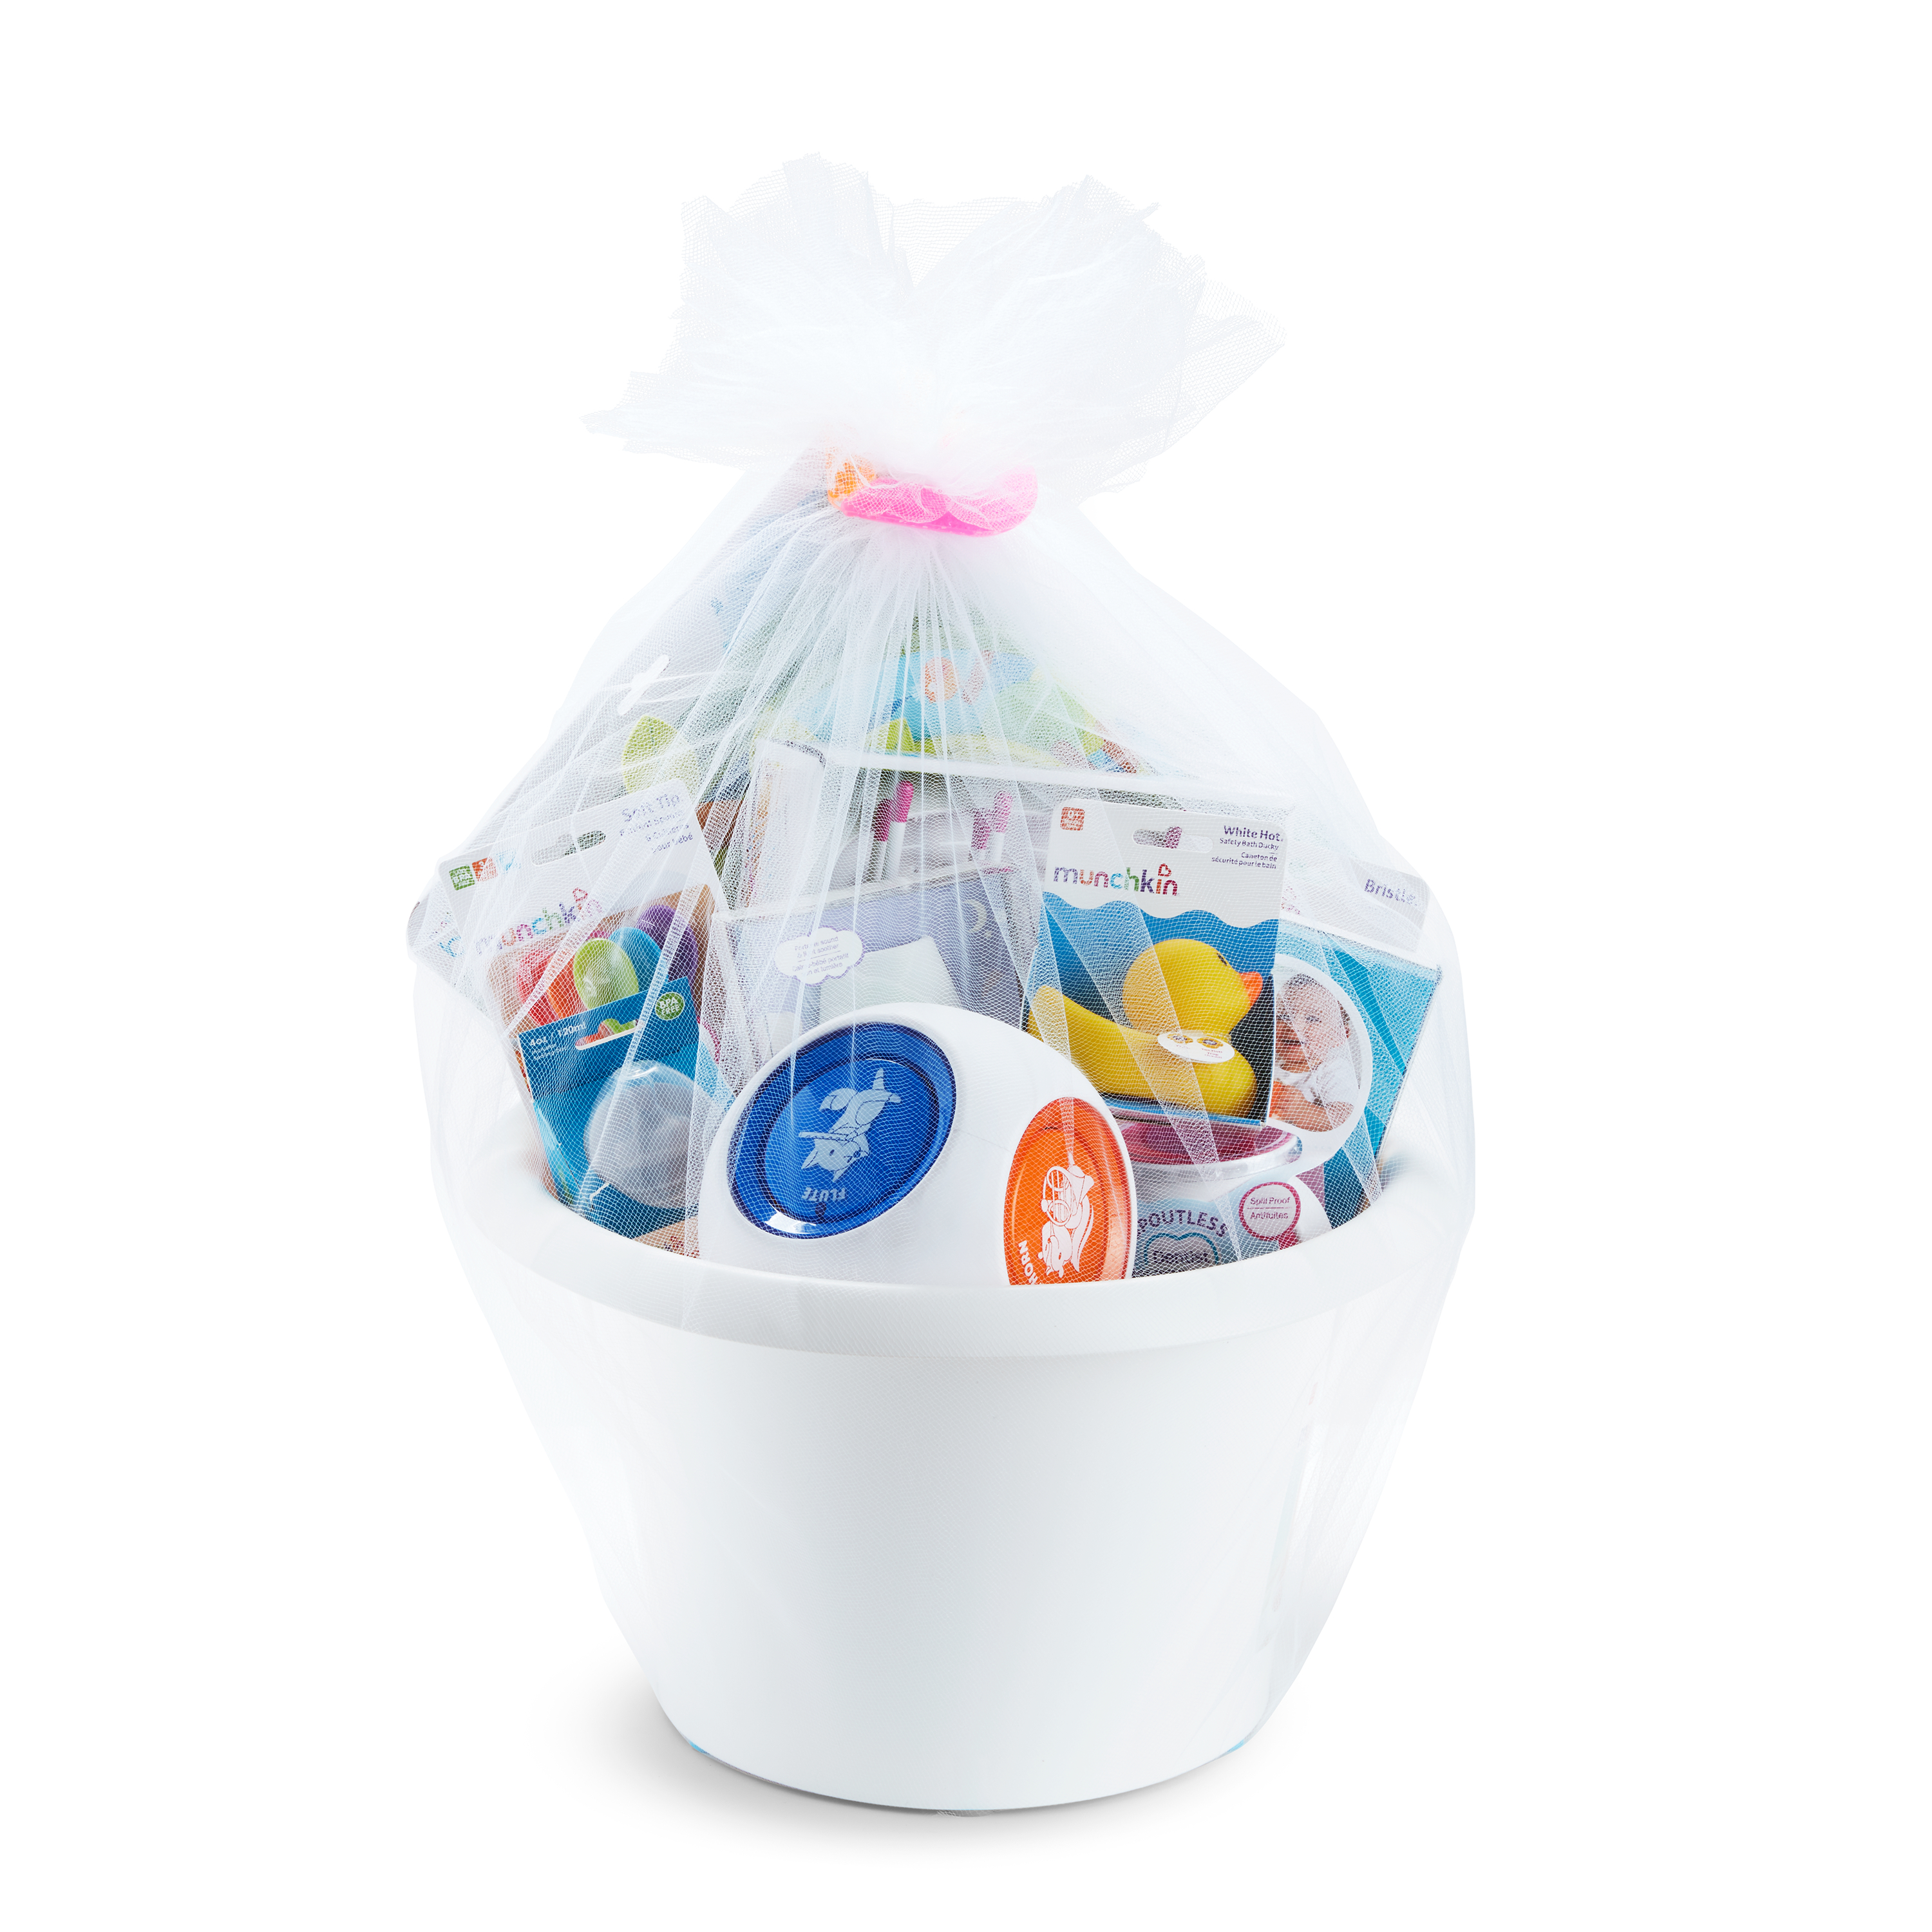 Munchkin My Munchkin Gift Basket, Great for Baby Showers, Includes 15 Baby Products, Pink - image 3 of 3